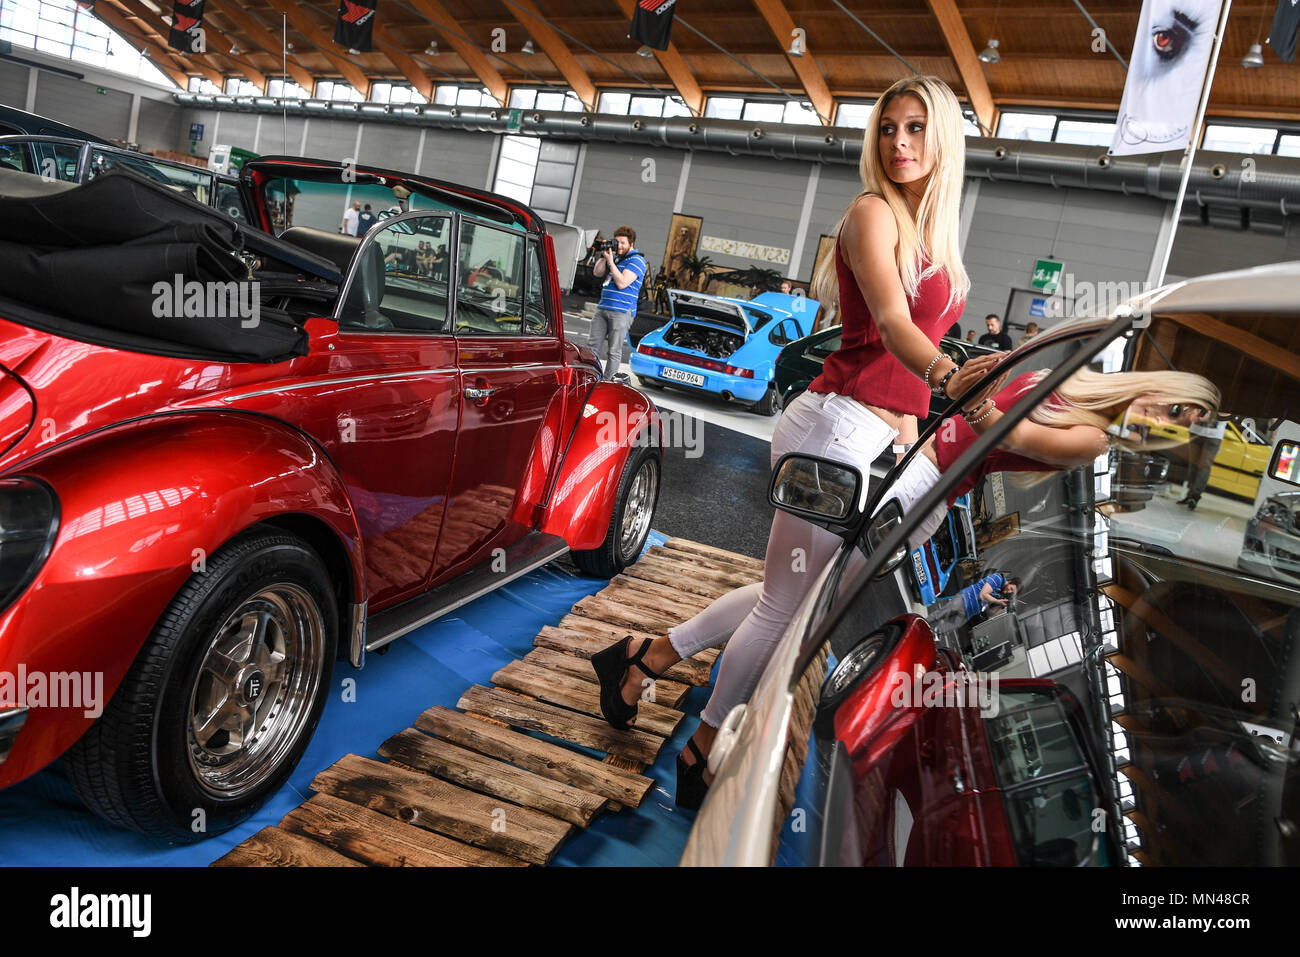 09 May 2018, Friedrichshafen, Germany: Miss Tuning Vanessa Schmitt leans  against a tuned VW Polo before the start of the fair "Tuning World  Bodensee". To the left is a tuned VW Beetle.